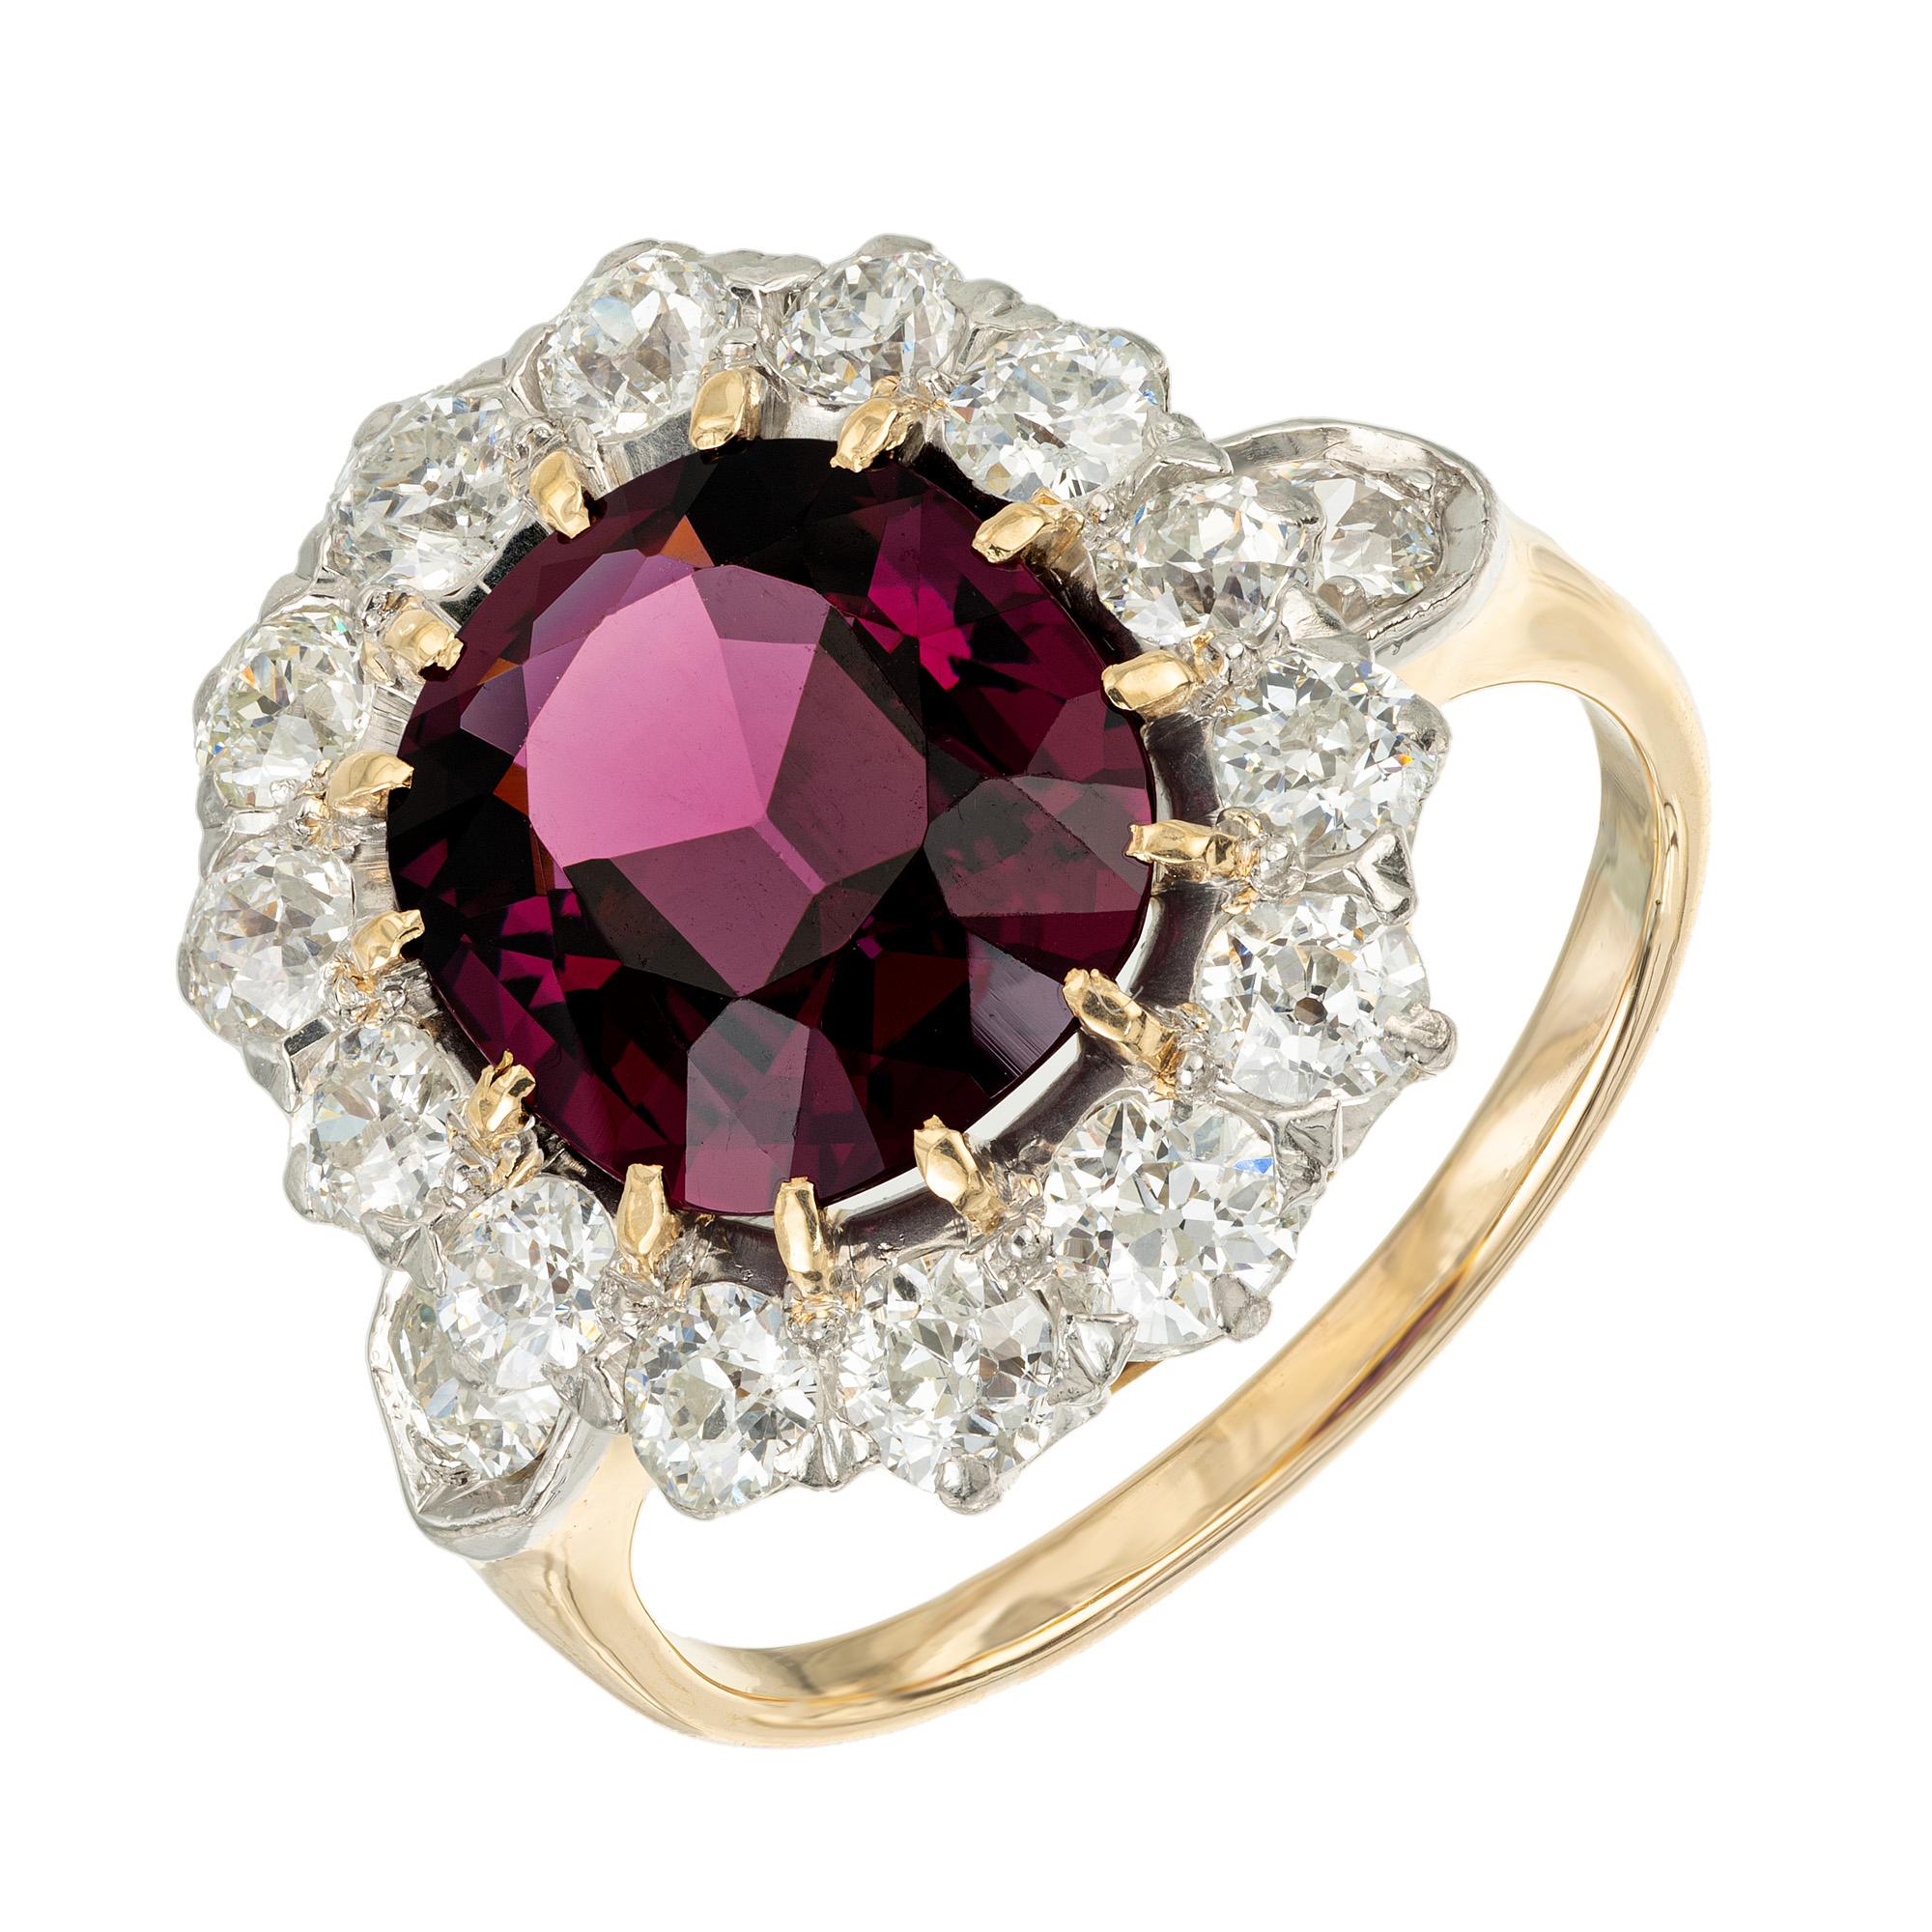 Early 1900's Radiant and elegant, the 3.54 carat oval rhodolite garnet and diamond halo engagement ring is a stunning masterpiece that captures the essence of sophistication and beauty. The center piece of this piece is a stunning 3.54ct oval garnet